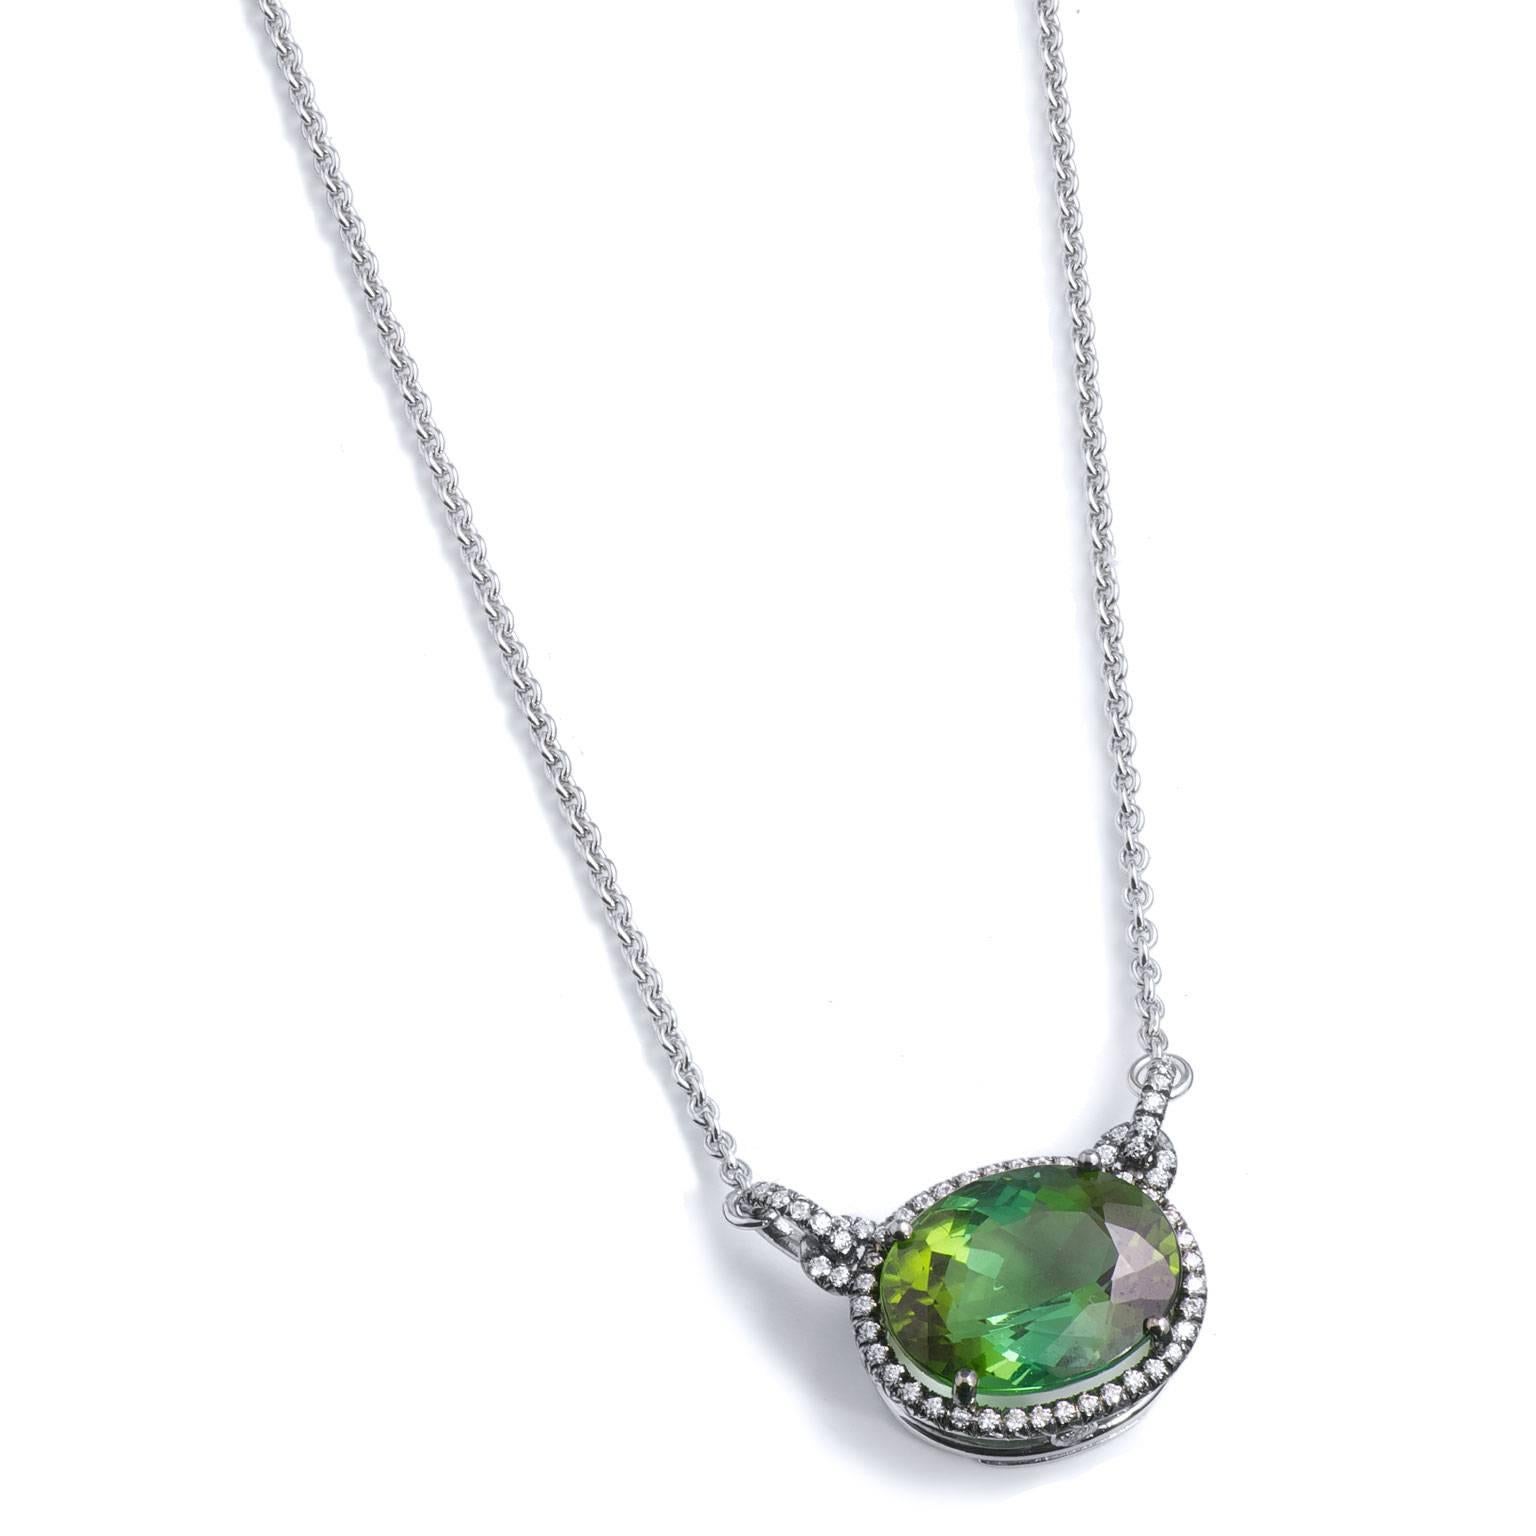 6.43 Carat Green Tourmaline and Diamond Pendant Necklace in 18 karat Gold

This is a handmade, one of a kind creation by H&H Jewels.  

It features a 6.43 carat of tourmaline surrounded by 0.25 carats of pave set diamond (F/VS) creating a halo.
 